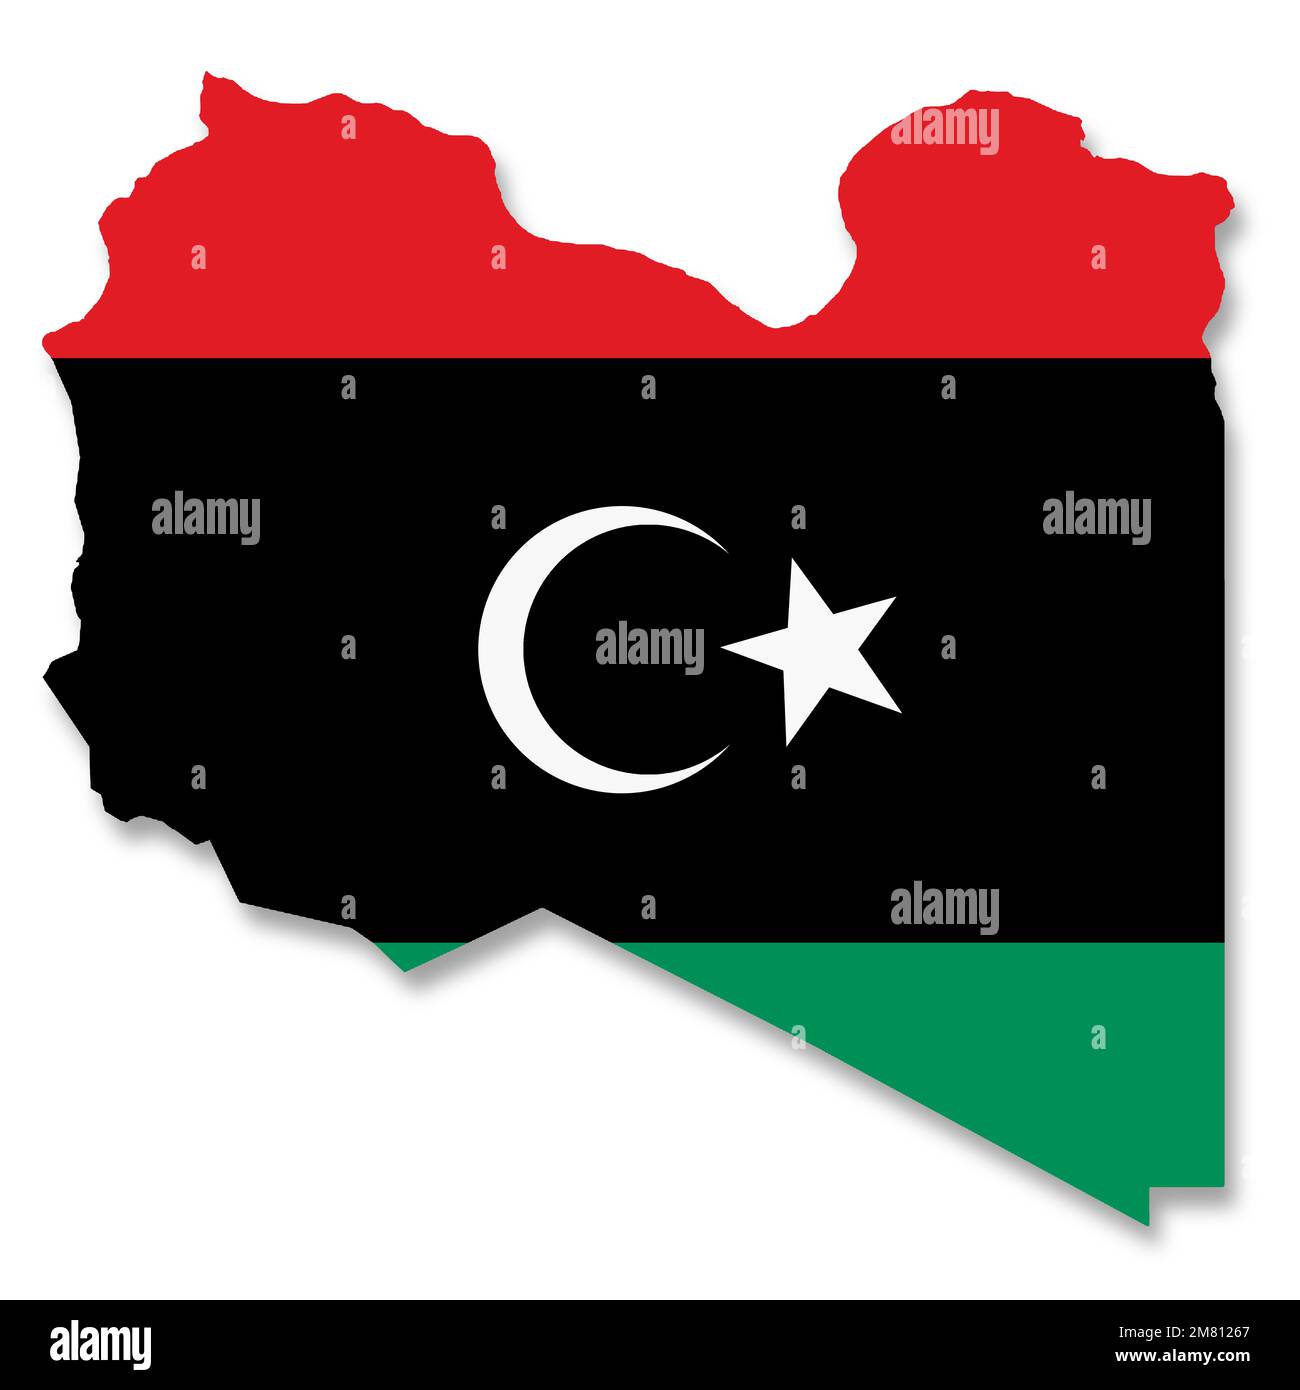 Libya flag map on white background with clipping path 3d illustration Stock Photo